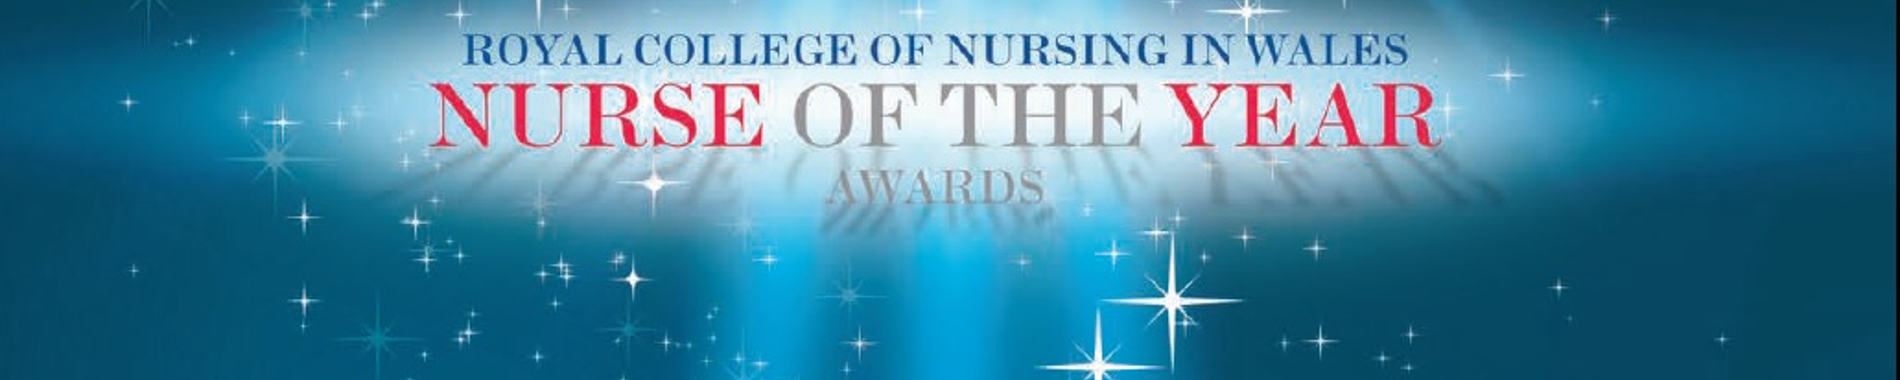 RCN Wales Nurse of the Year Awards 2021 banner 2